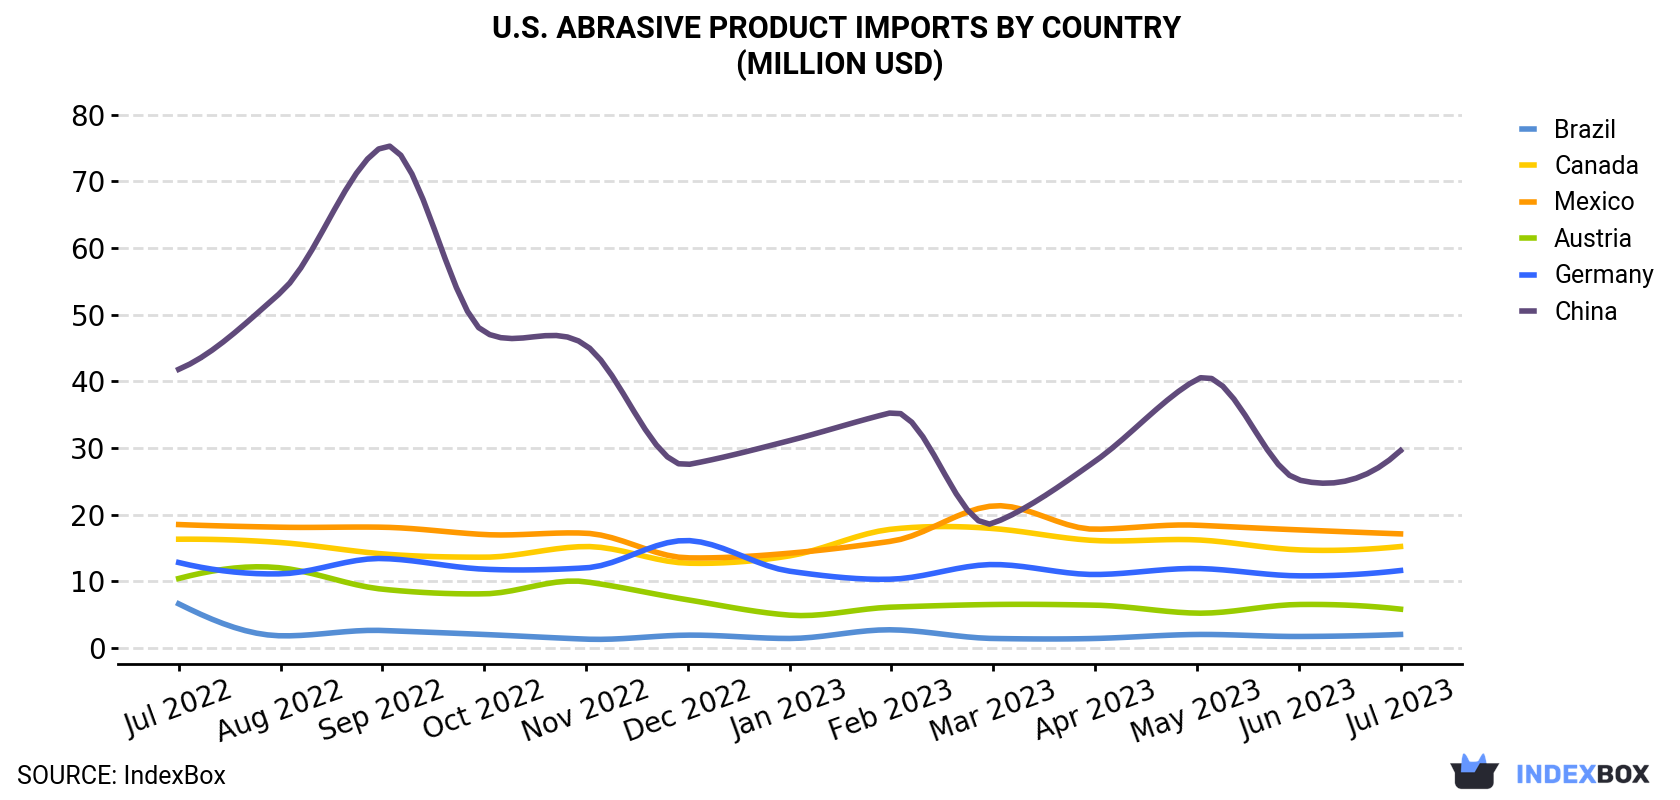 U.S. Abrasive Product Imports By Country (Million USD)